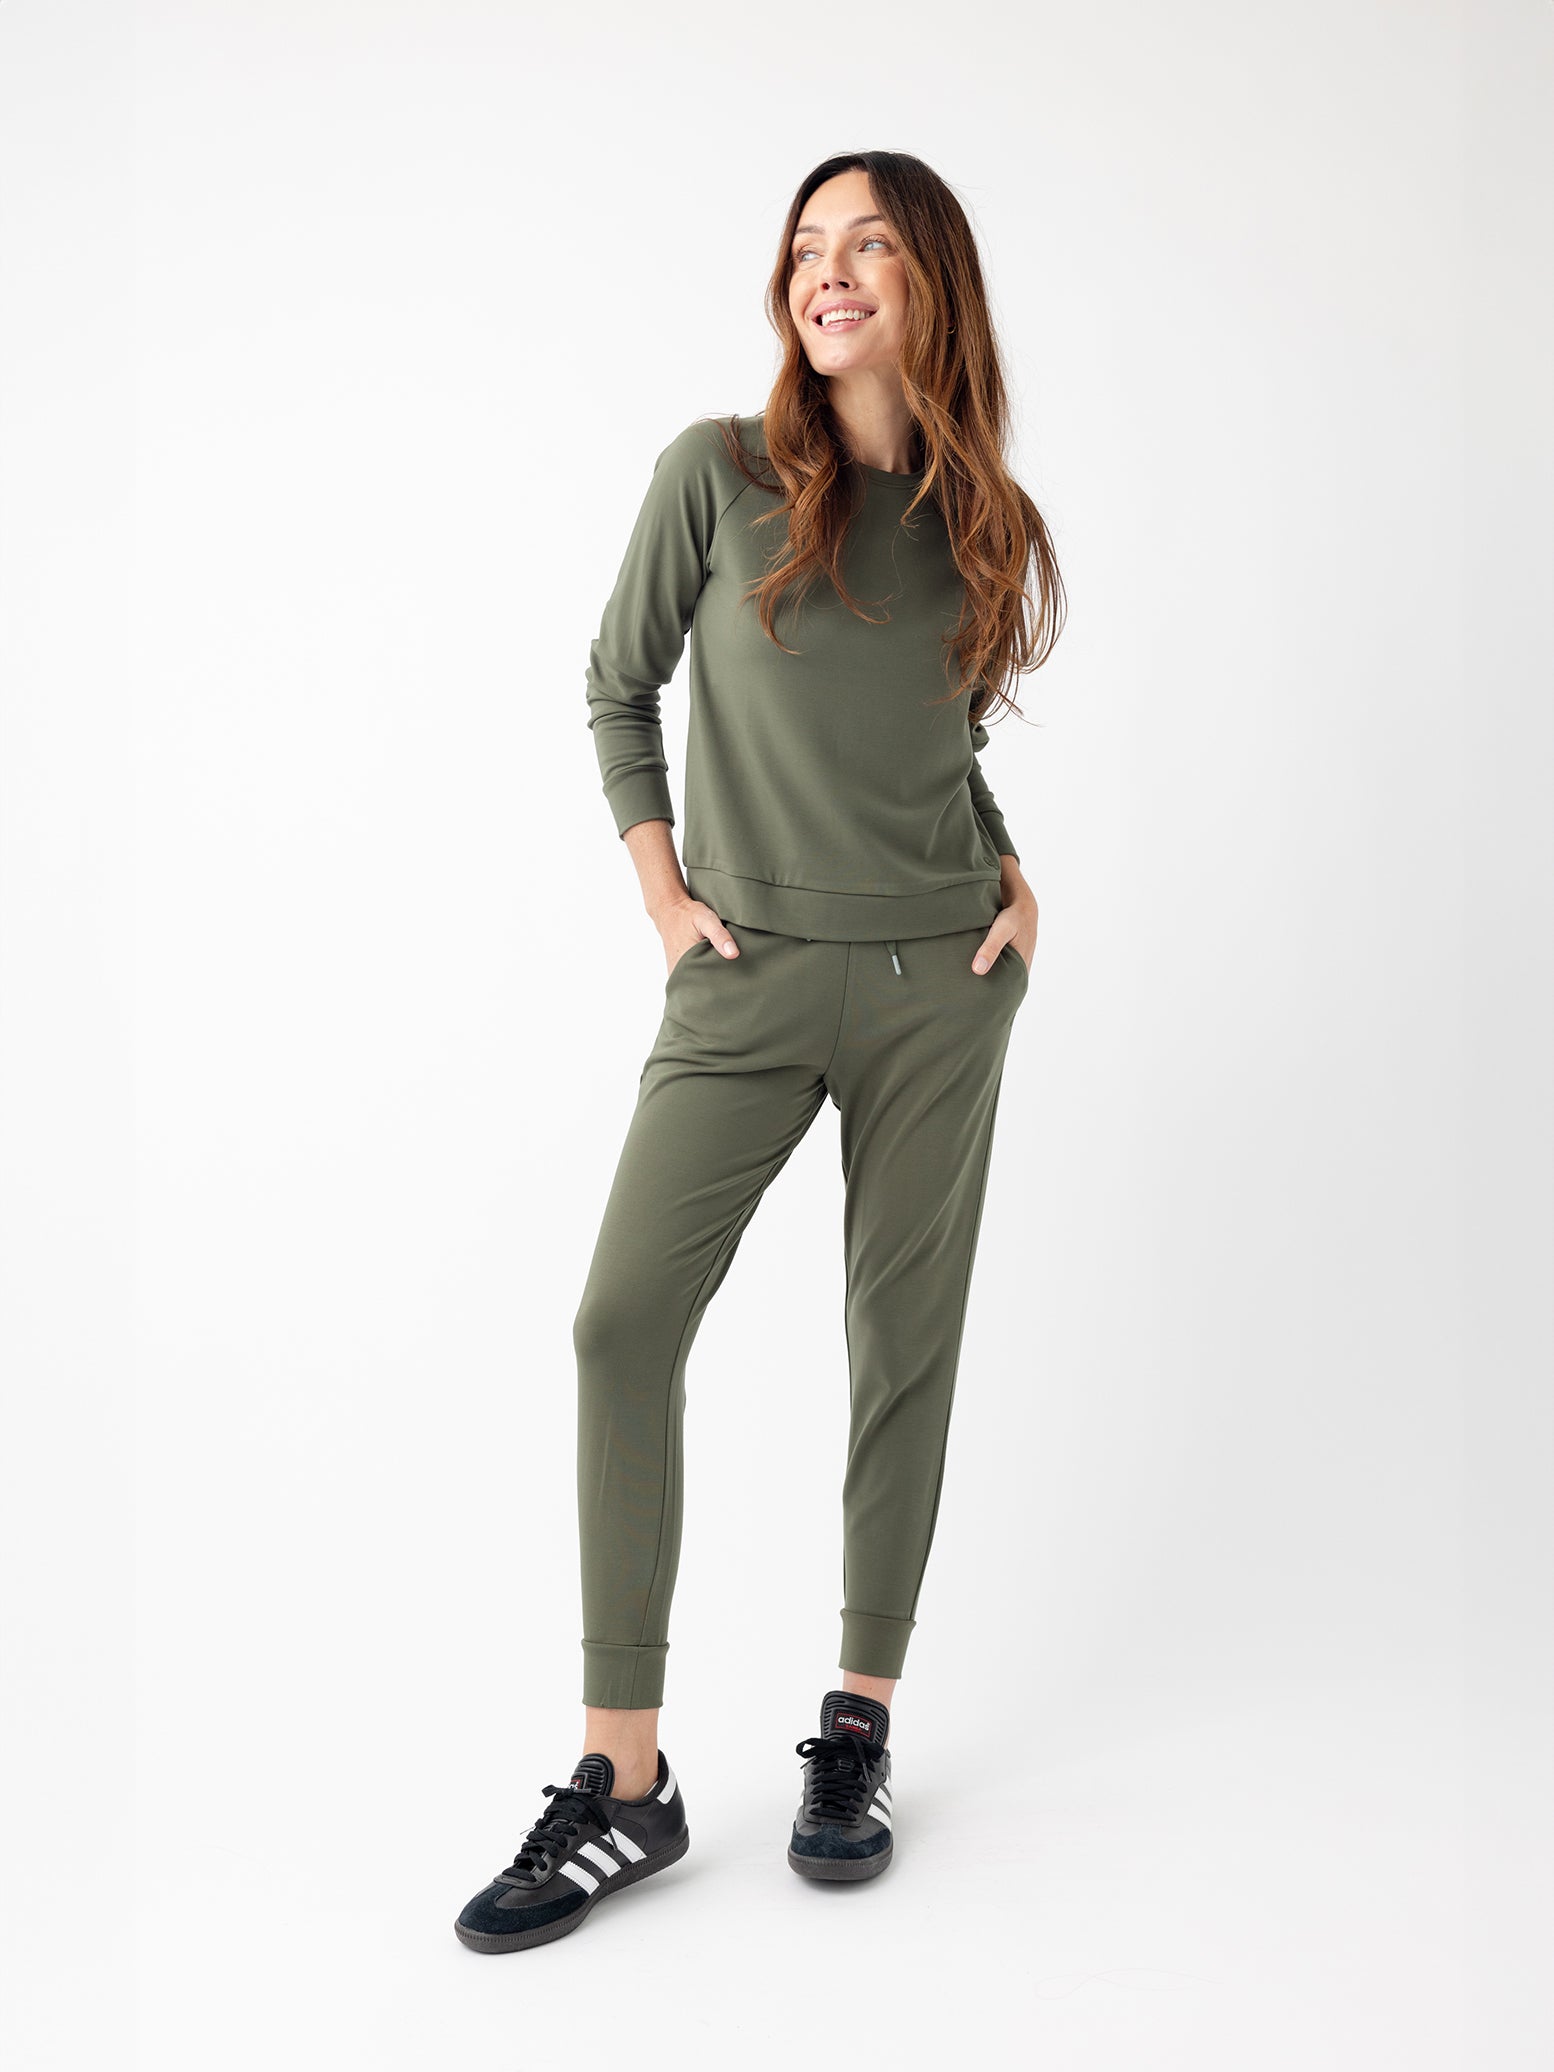 Woman in olive jogger set with white background 